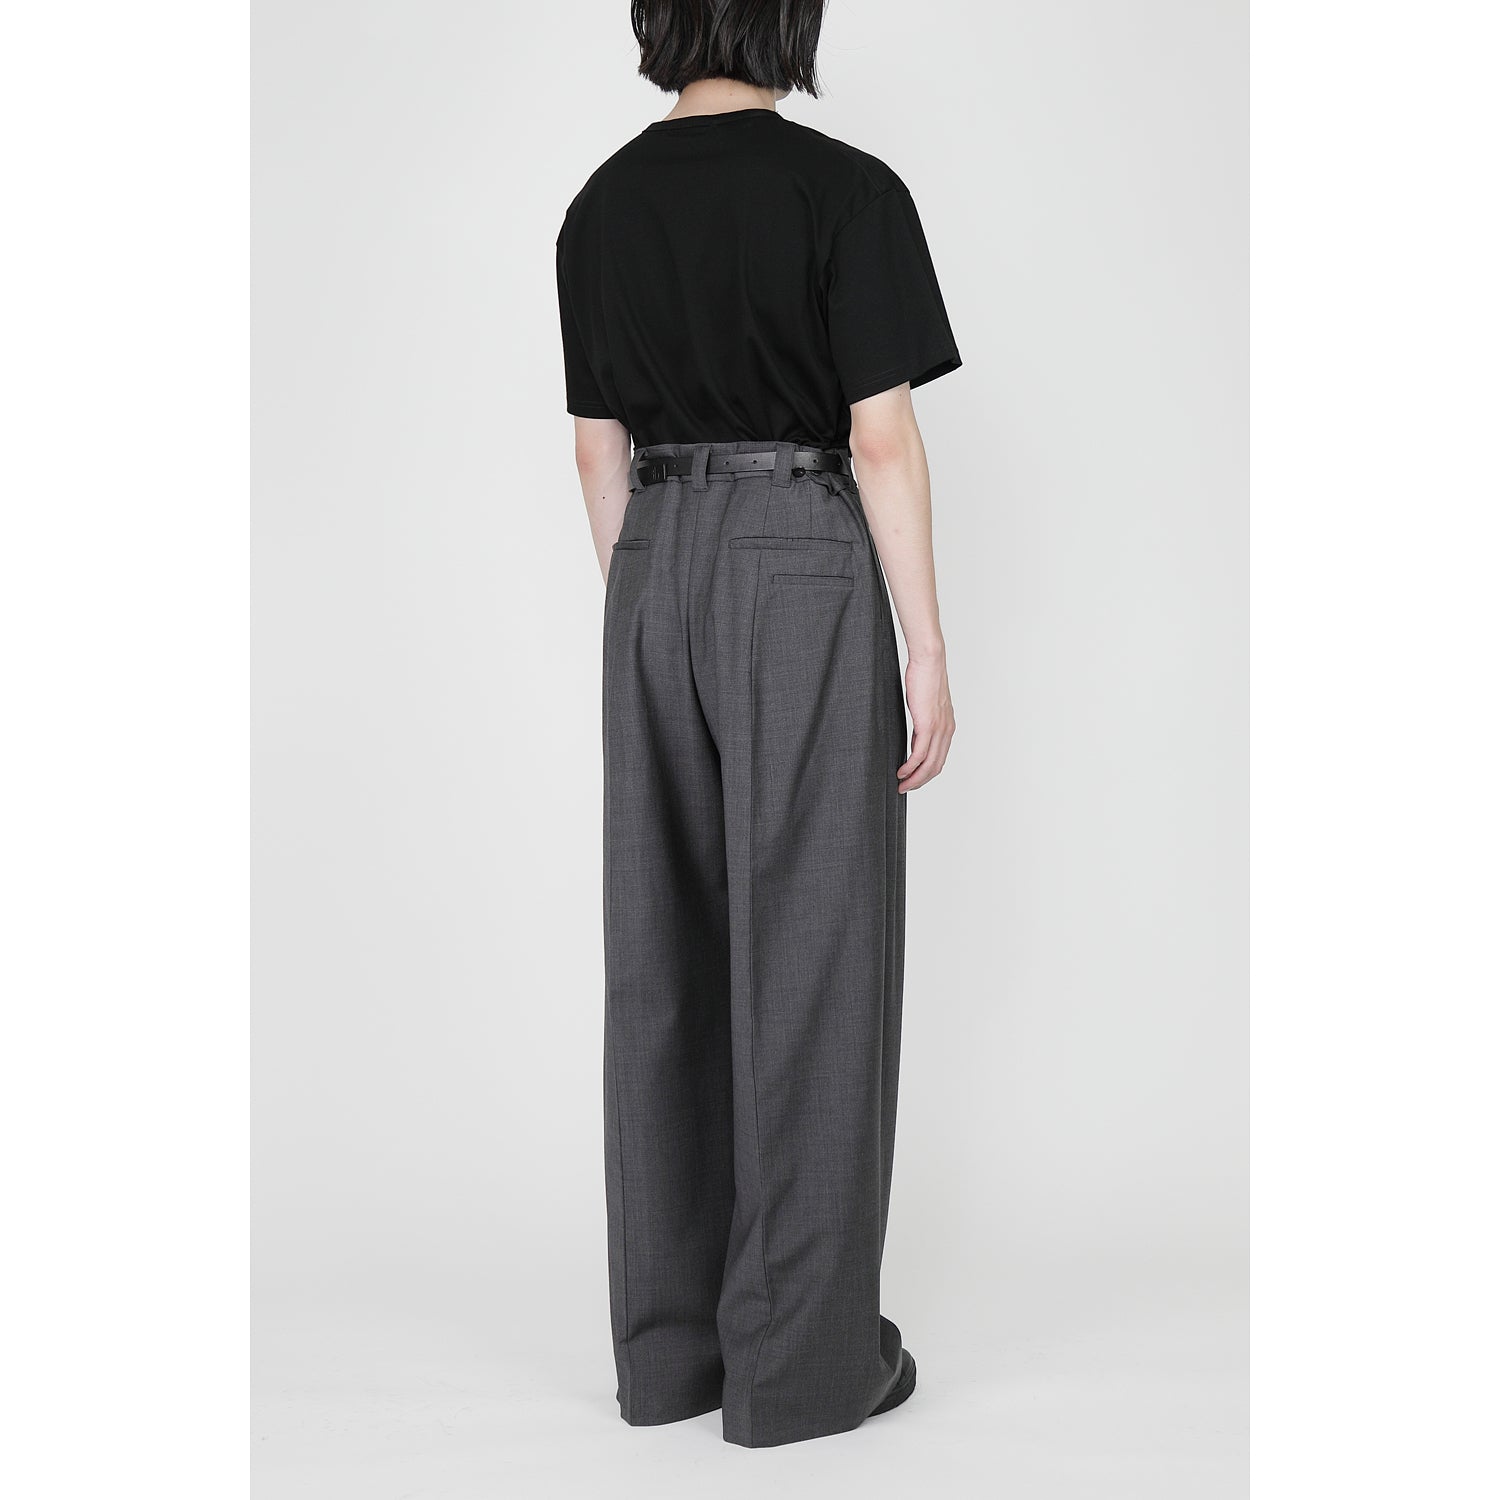 Extra Volumed Tapered Pants / gray